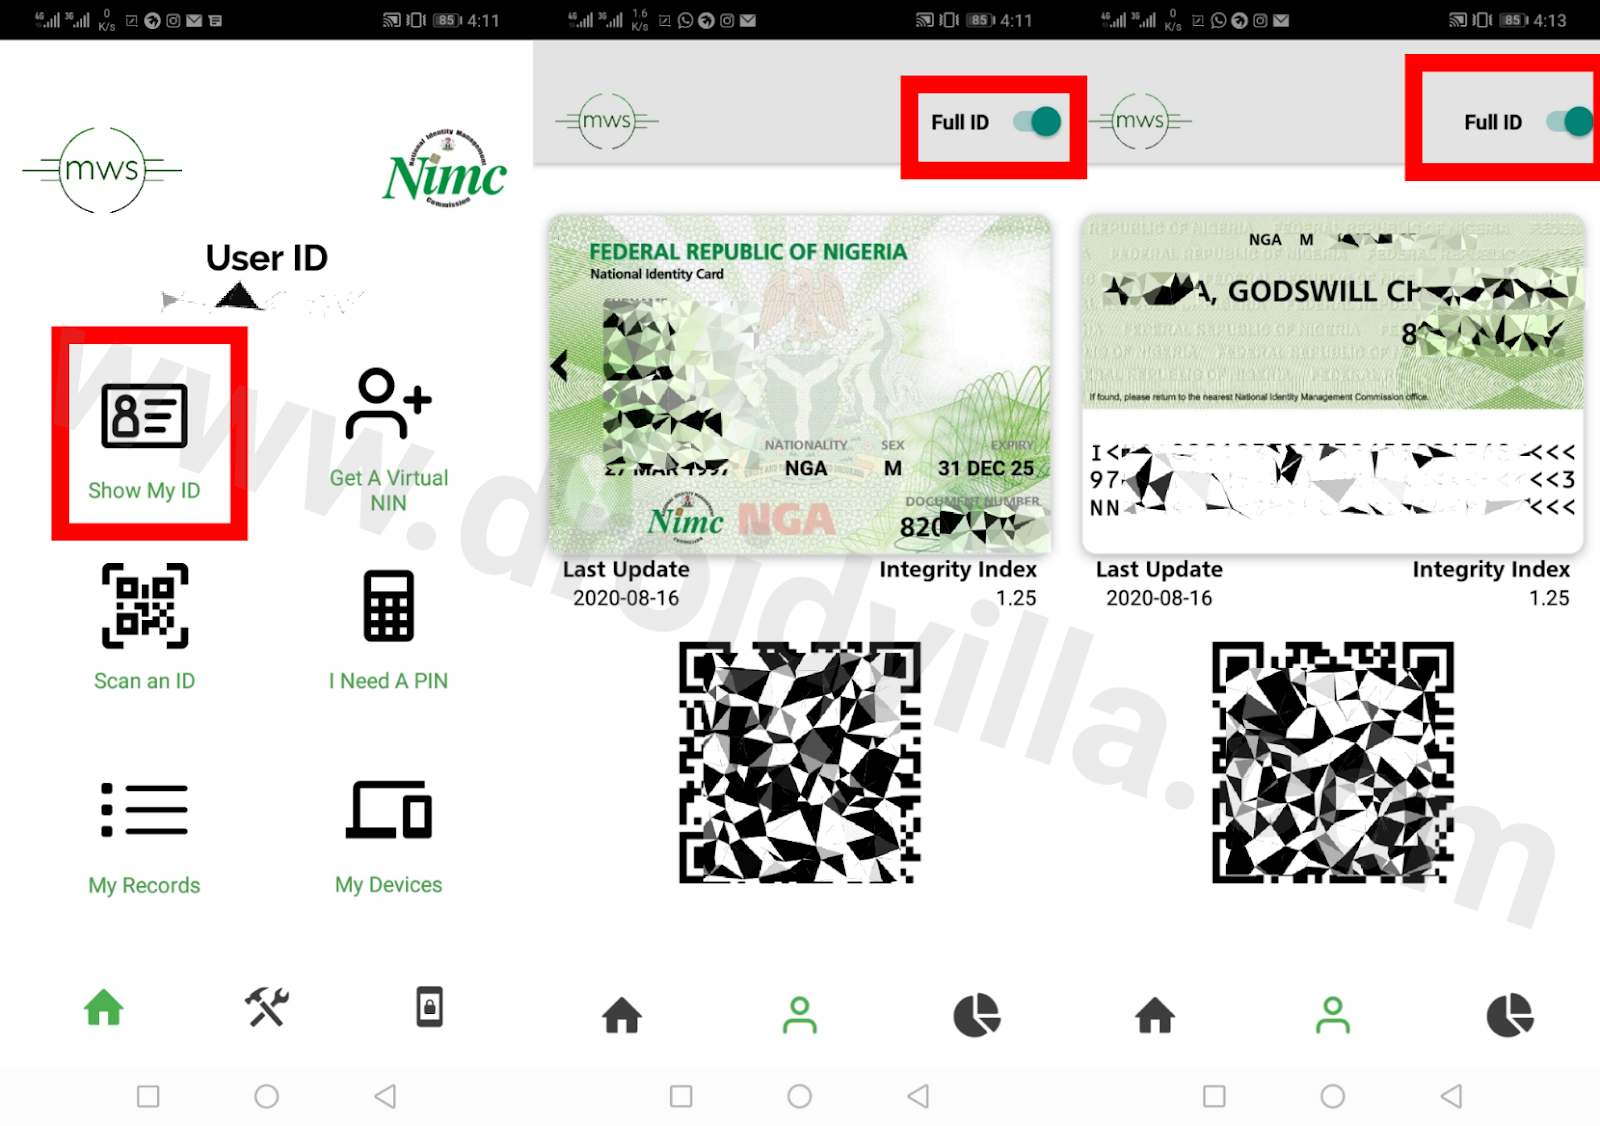 nimc-apk-app-now-available-on-google-playstore-for-download-droidvilla-tech